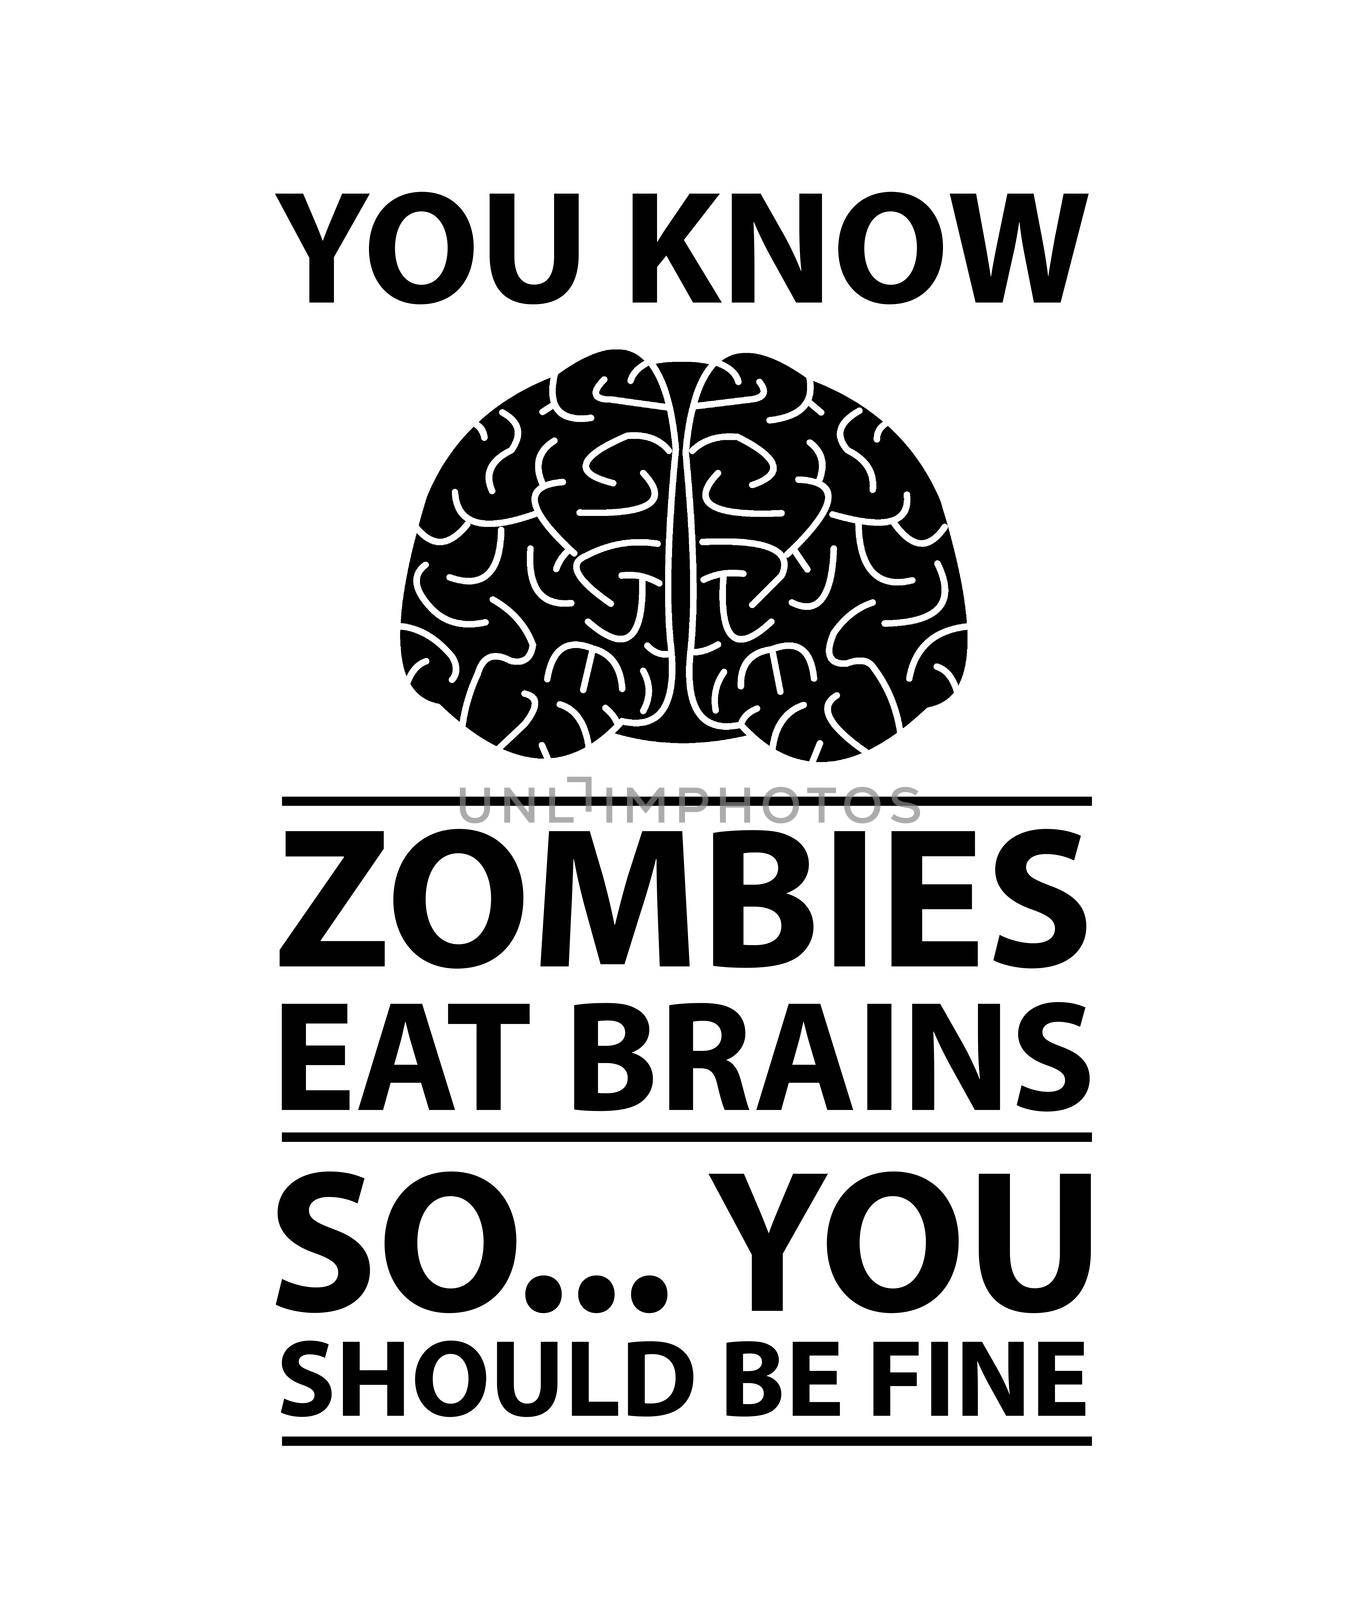 You Know - Zombies Eat Brains Joke by Bigalbaloo